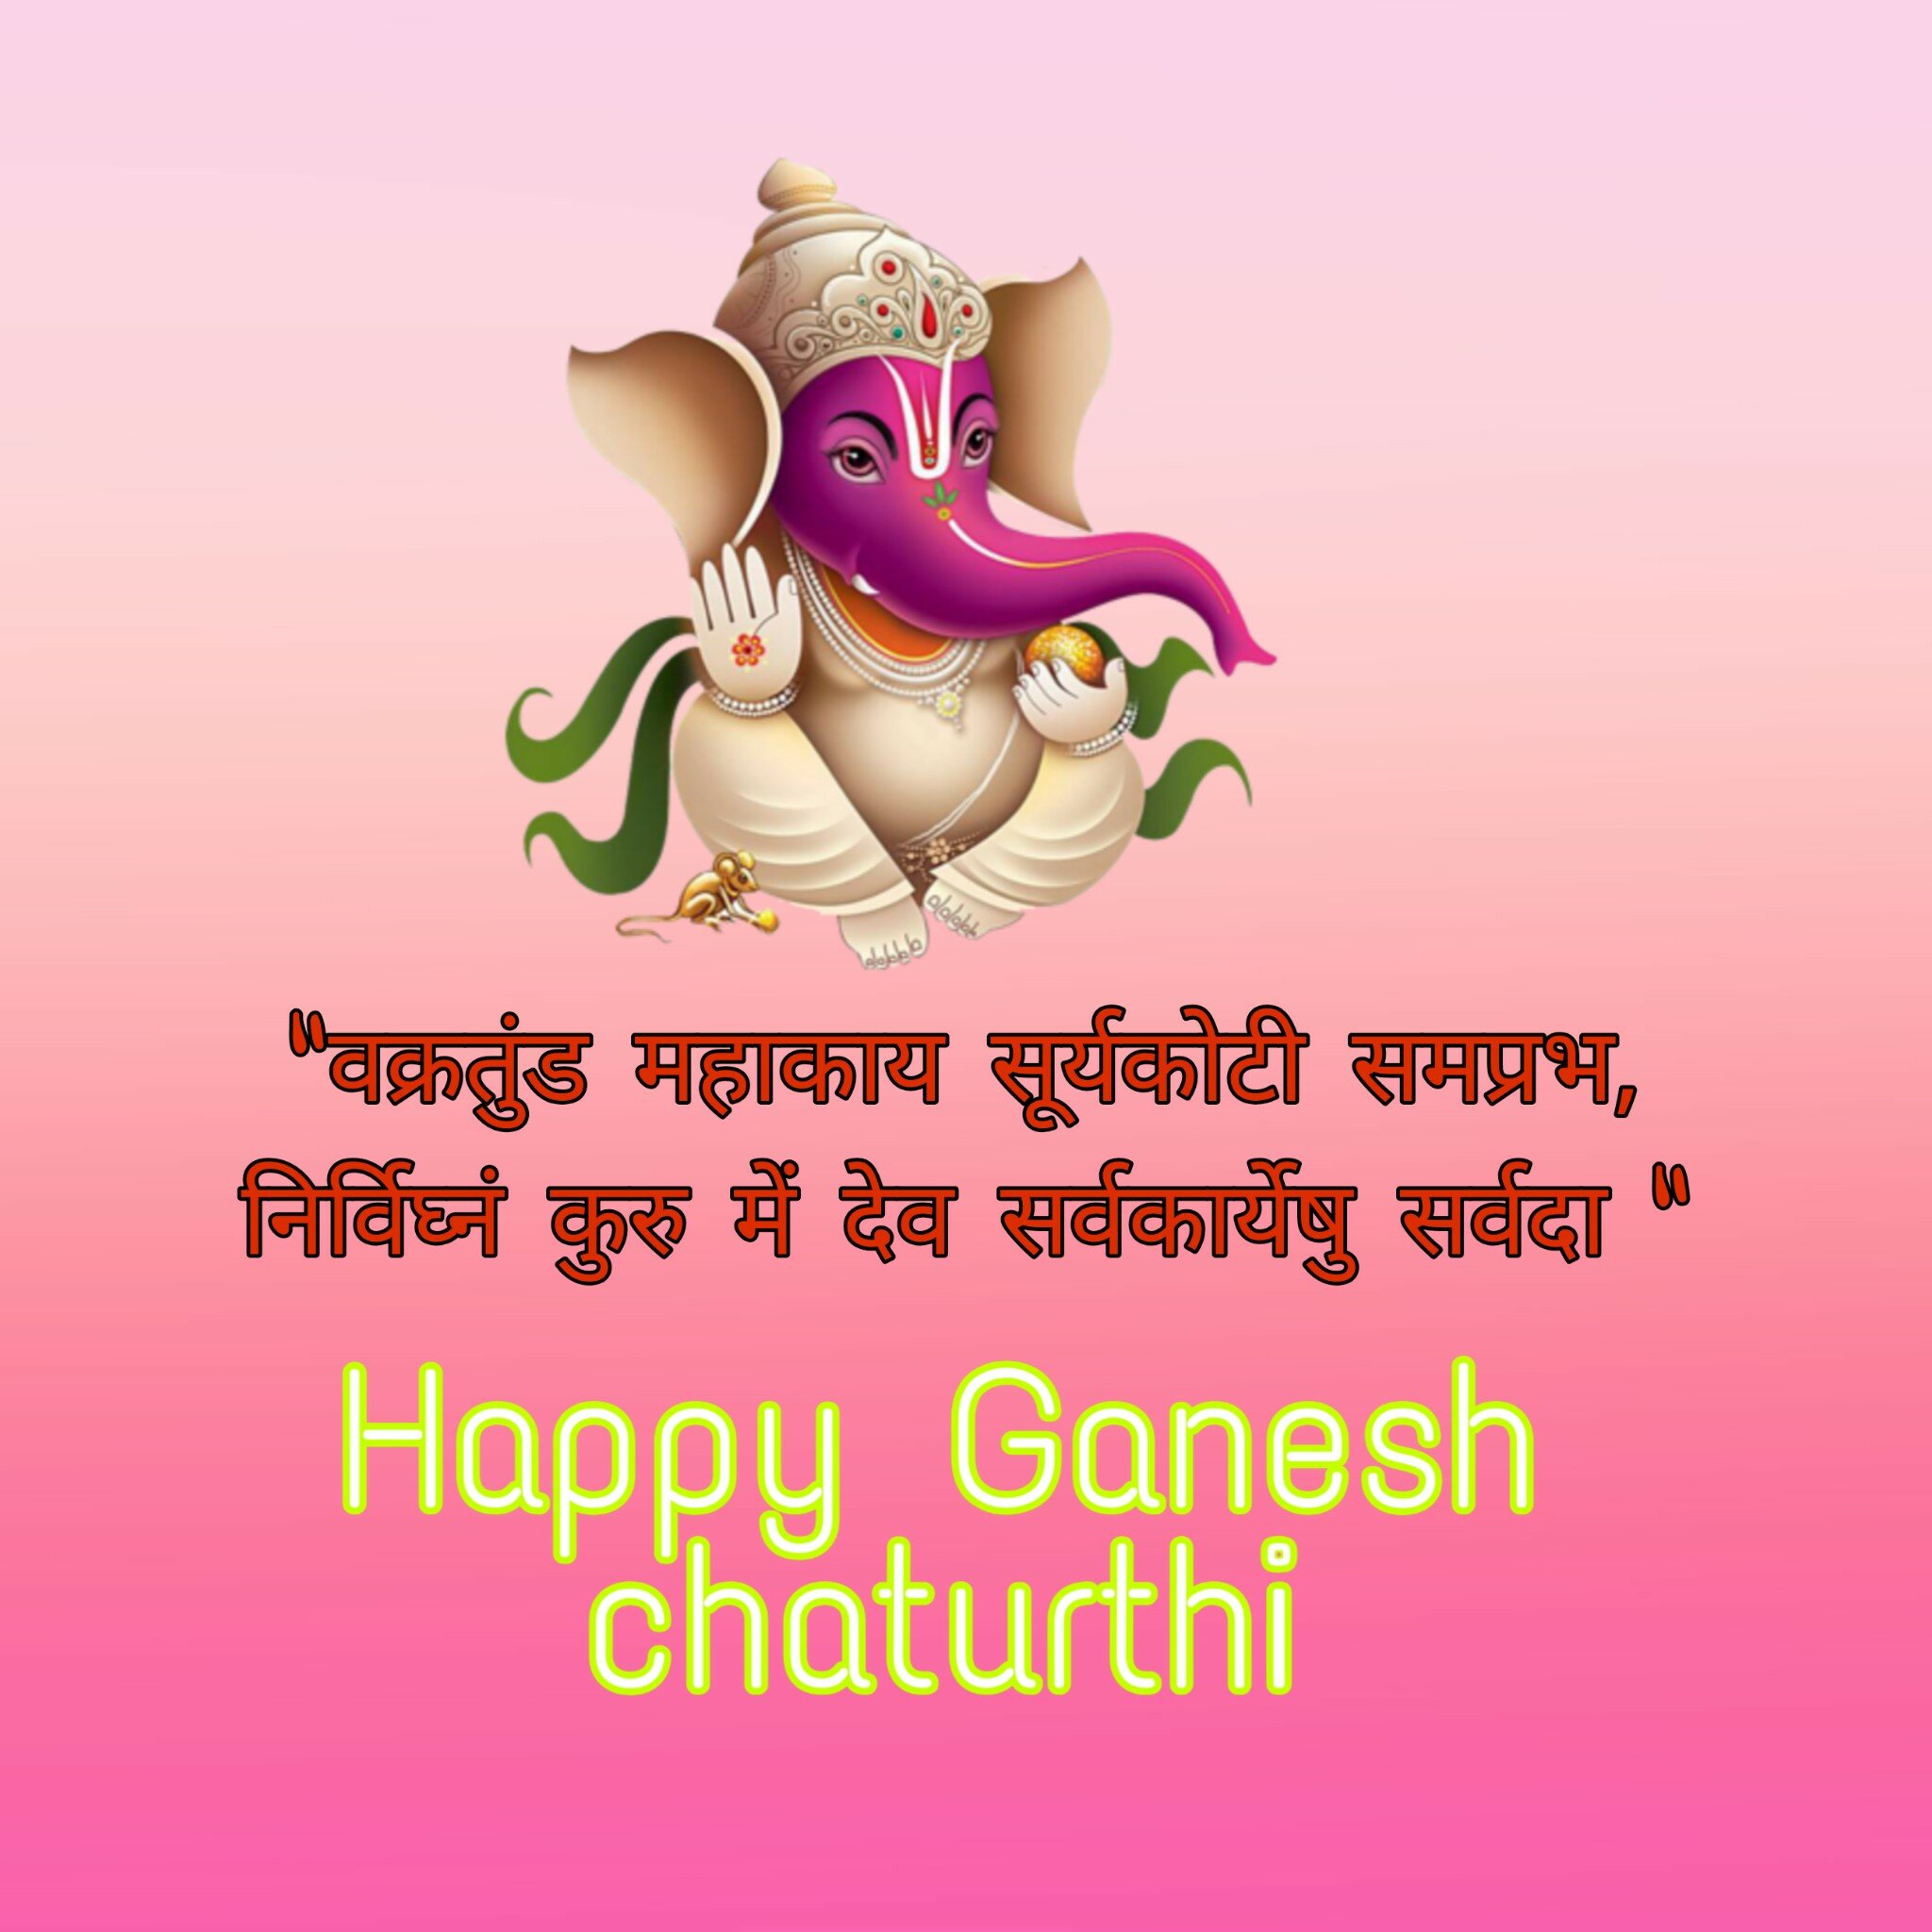 lord Ganesh images